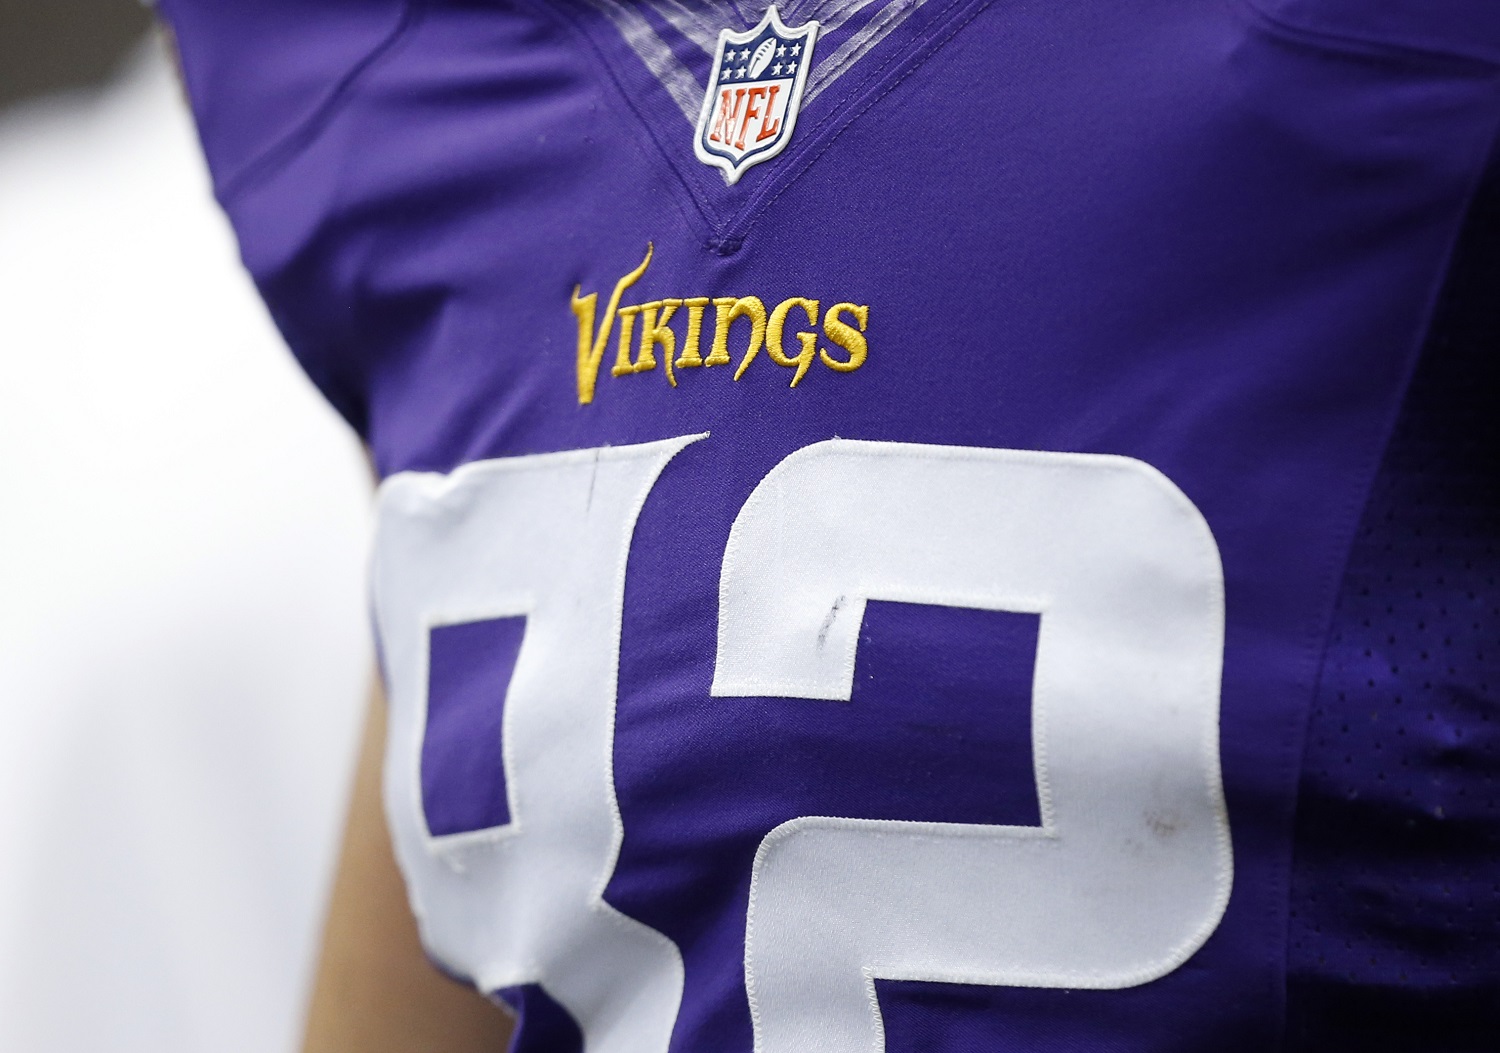 THe Minnesota Vikings logo is seen on a jersey before an NFL football game against the New Orleans Saints in New Orleans, Sunday, Sept. 21, 2014. (AP Photo/Rogelio Solis)